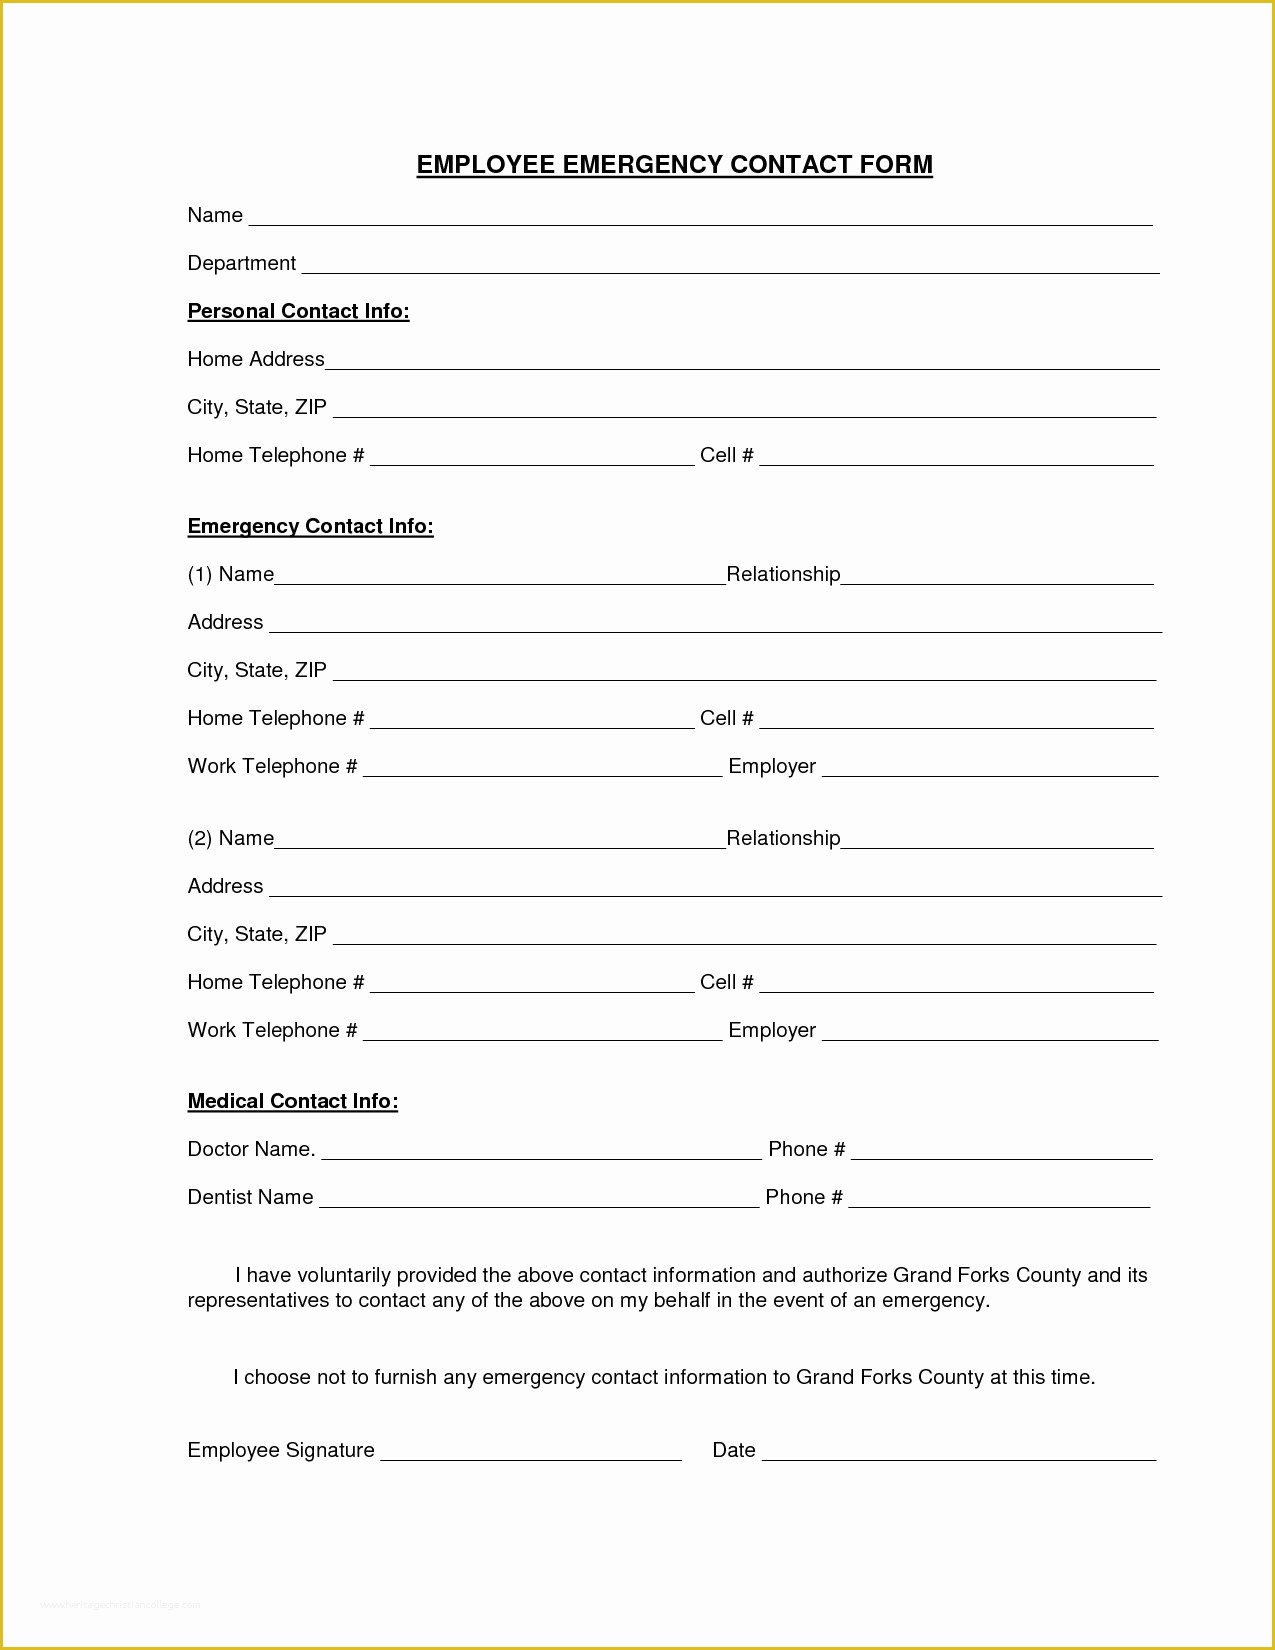 Free Emergency Contact form Template for Employees Of Download A Free Emergency Contact form and Emergency Card